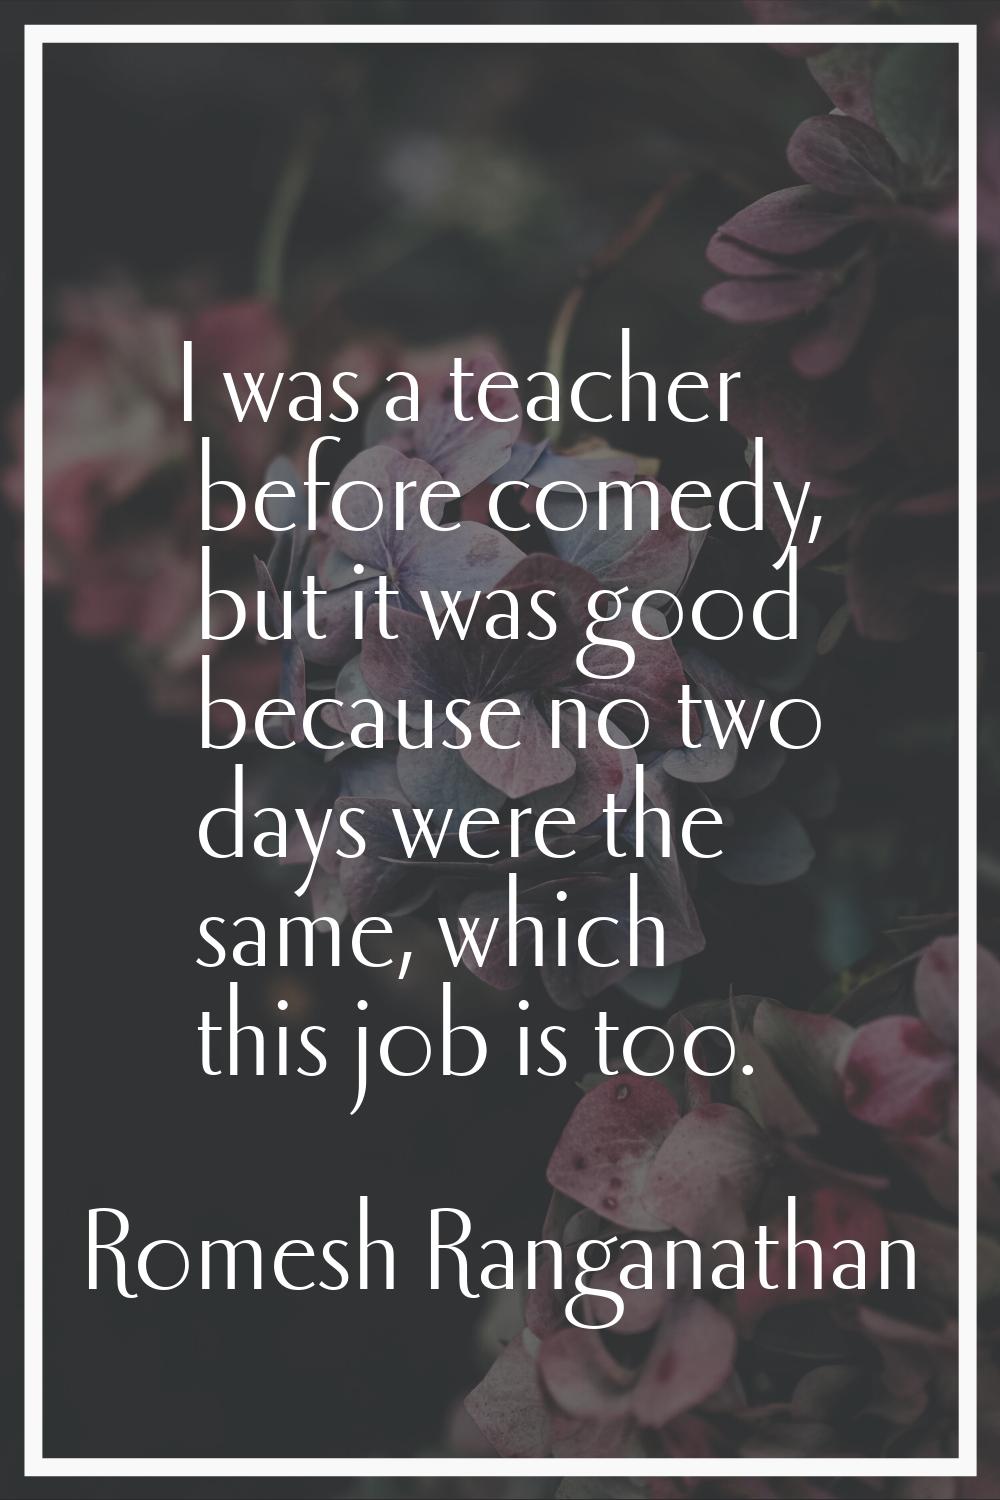 I was a teacher before comedy, but it was good because no two days were the same, which this job is